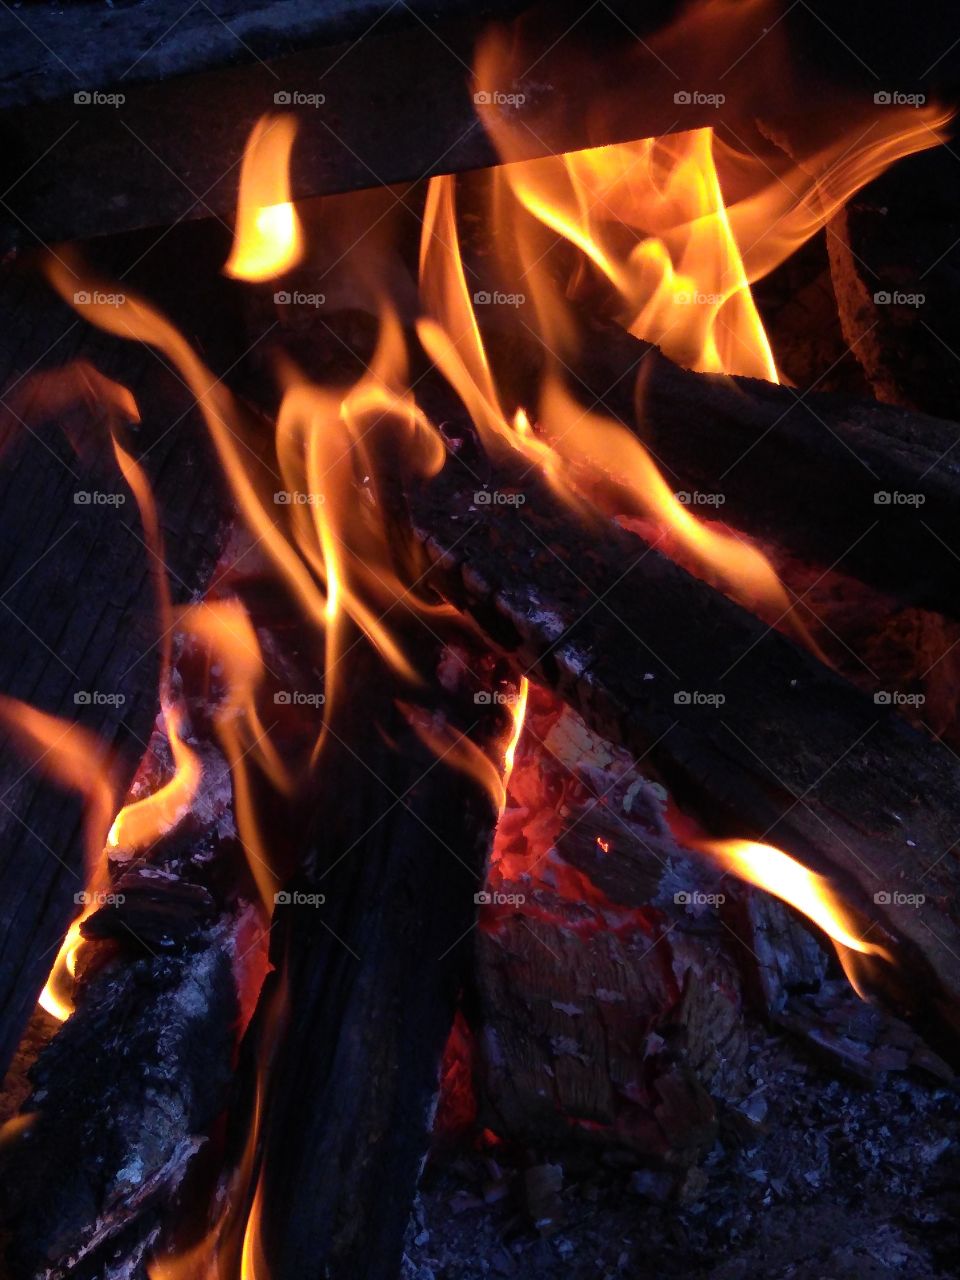 Fire/ flames/ wood stove/ ember/ element/ nature/ wood...